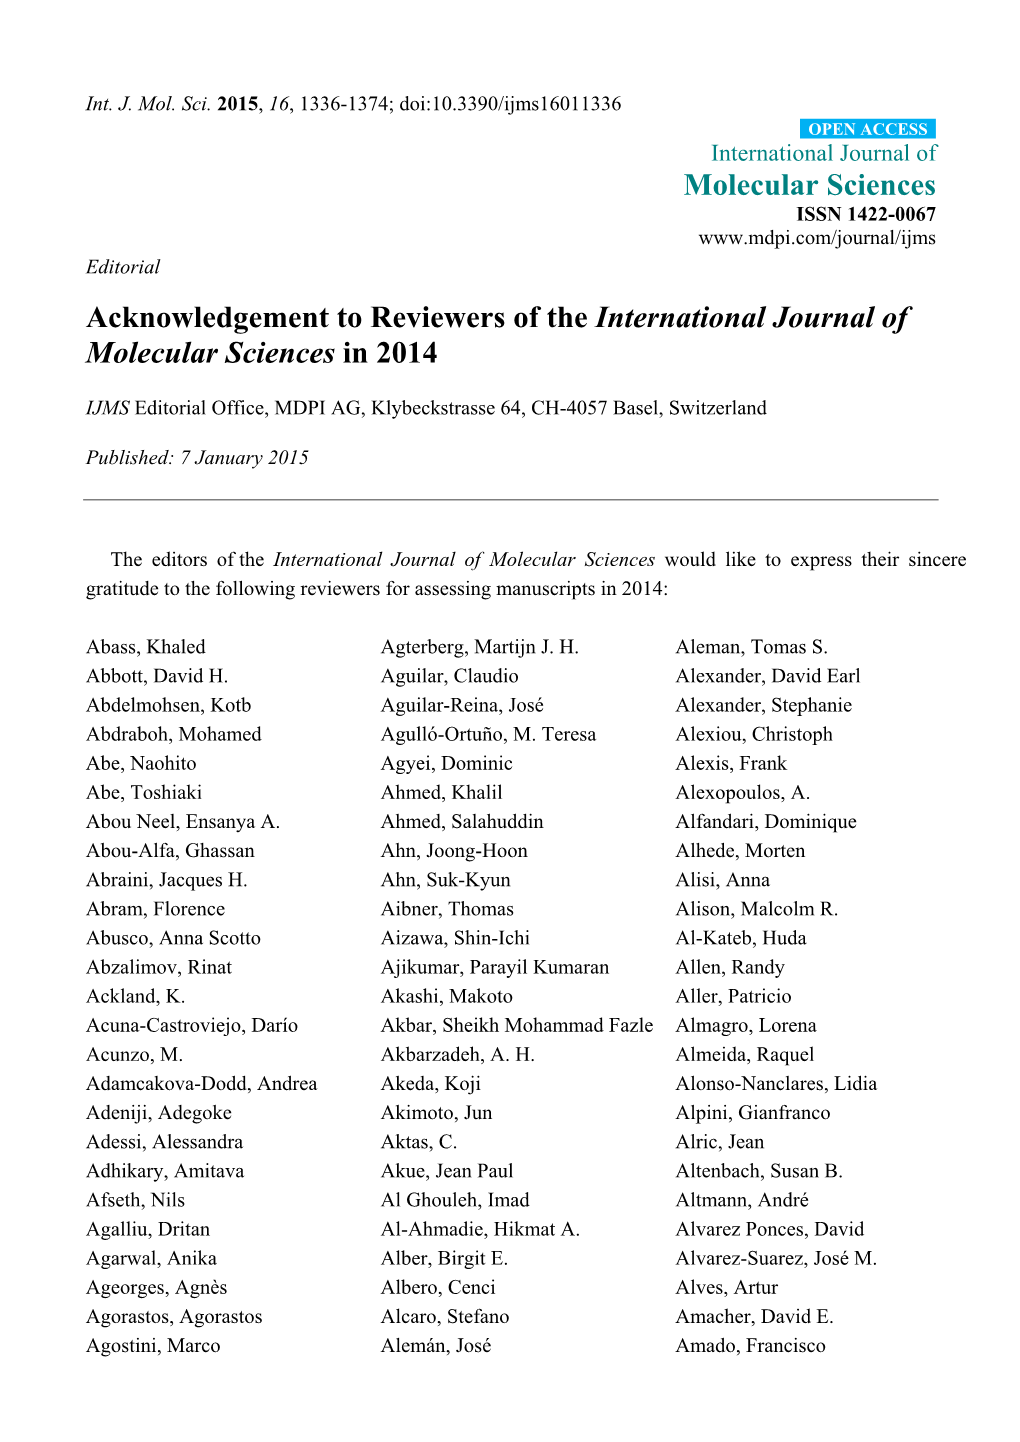 Acknowledgement to Reviewers of International Journal of Molecular